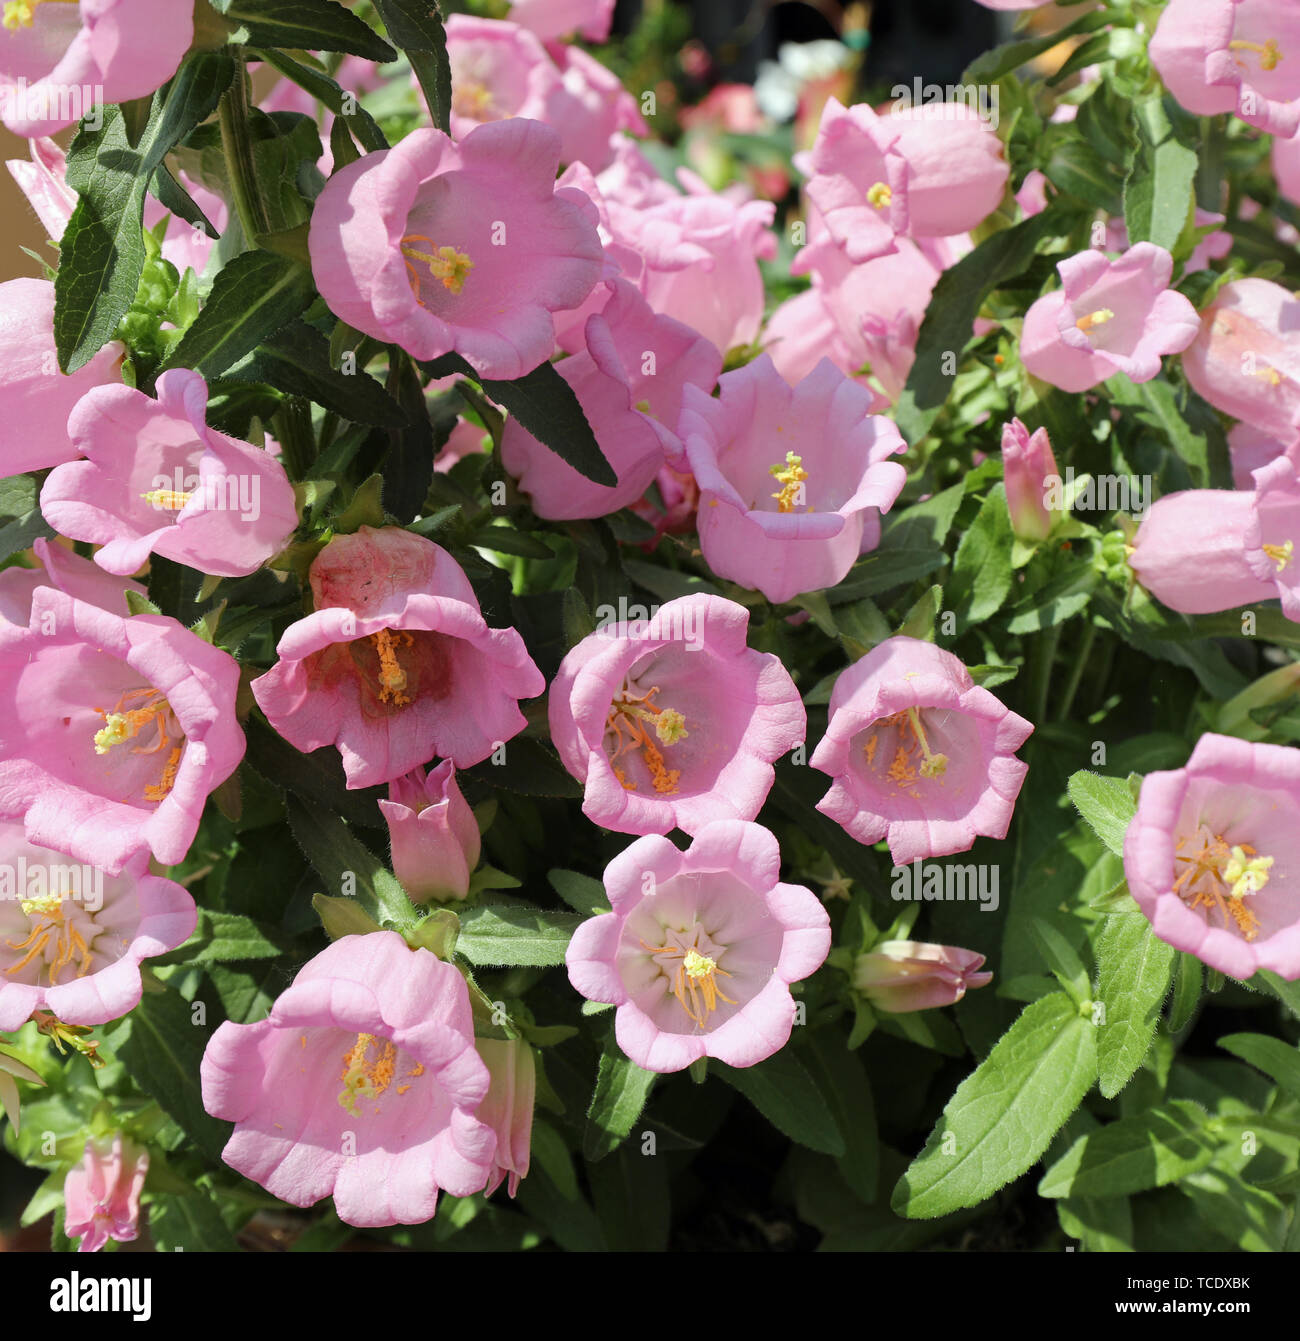 background of pink flowers called Bell flowers or campanula in spring Stock Photo